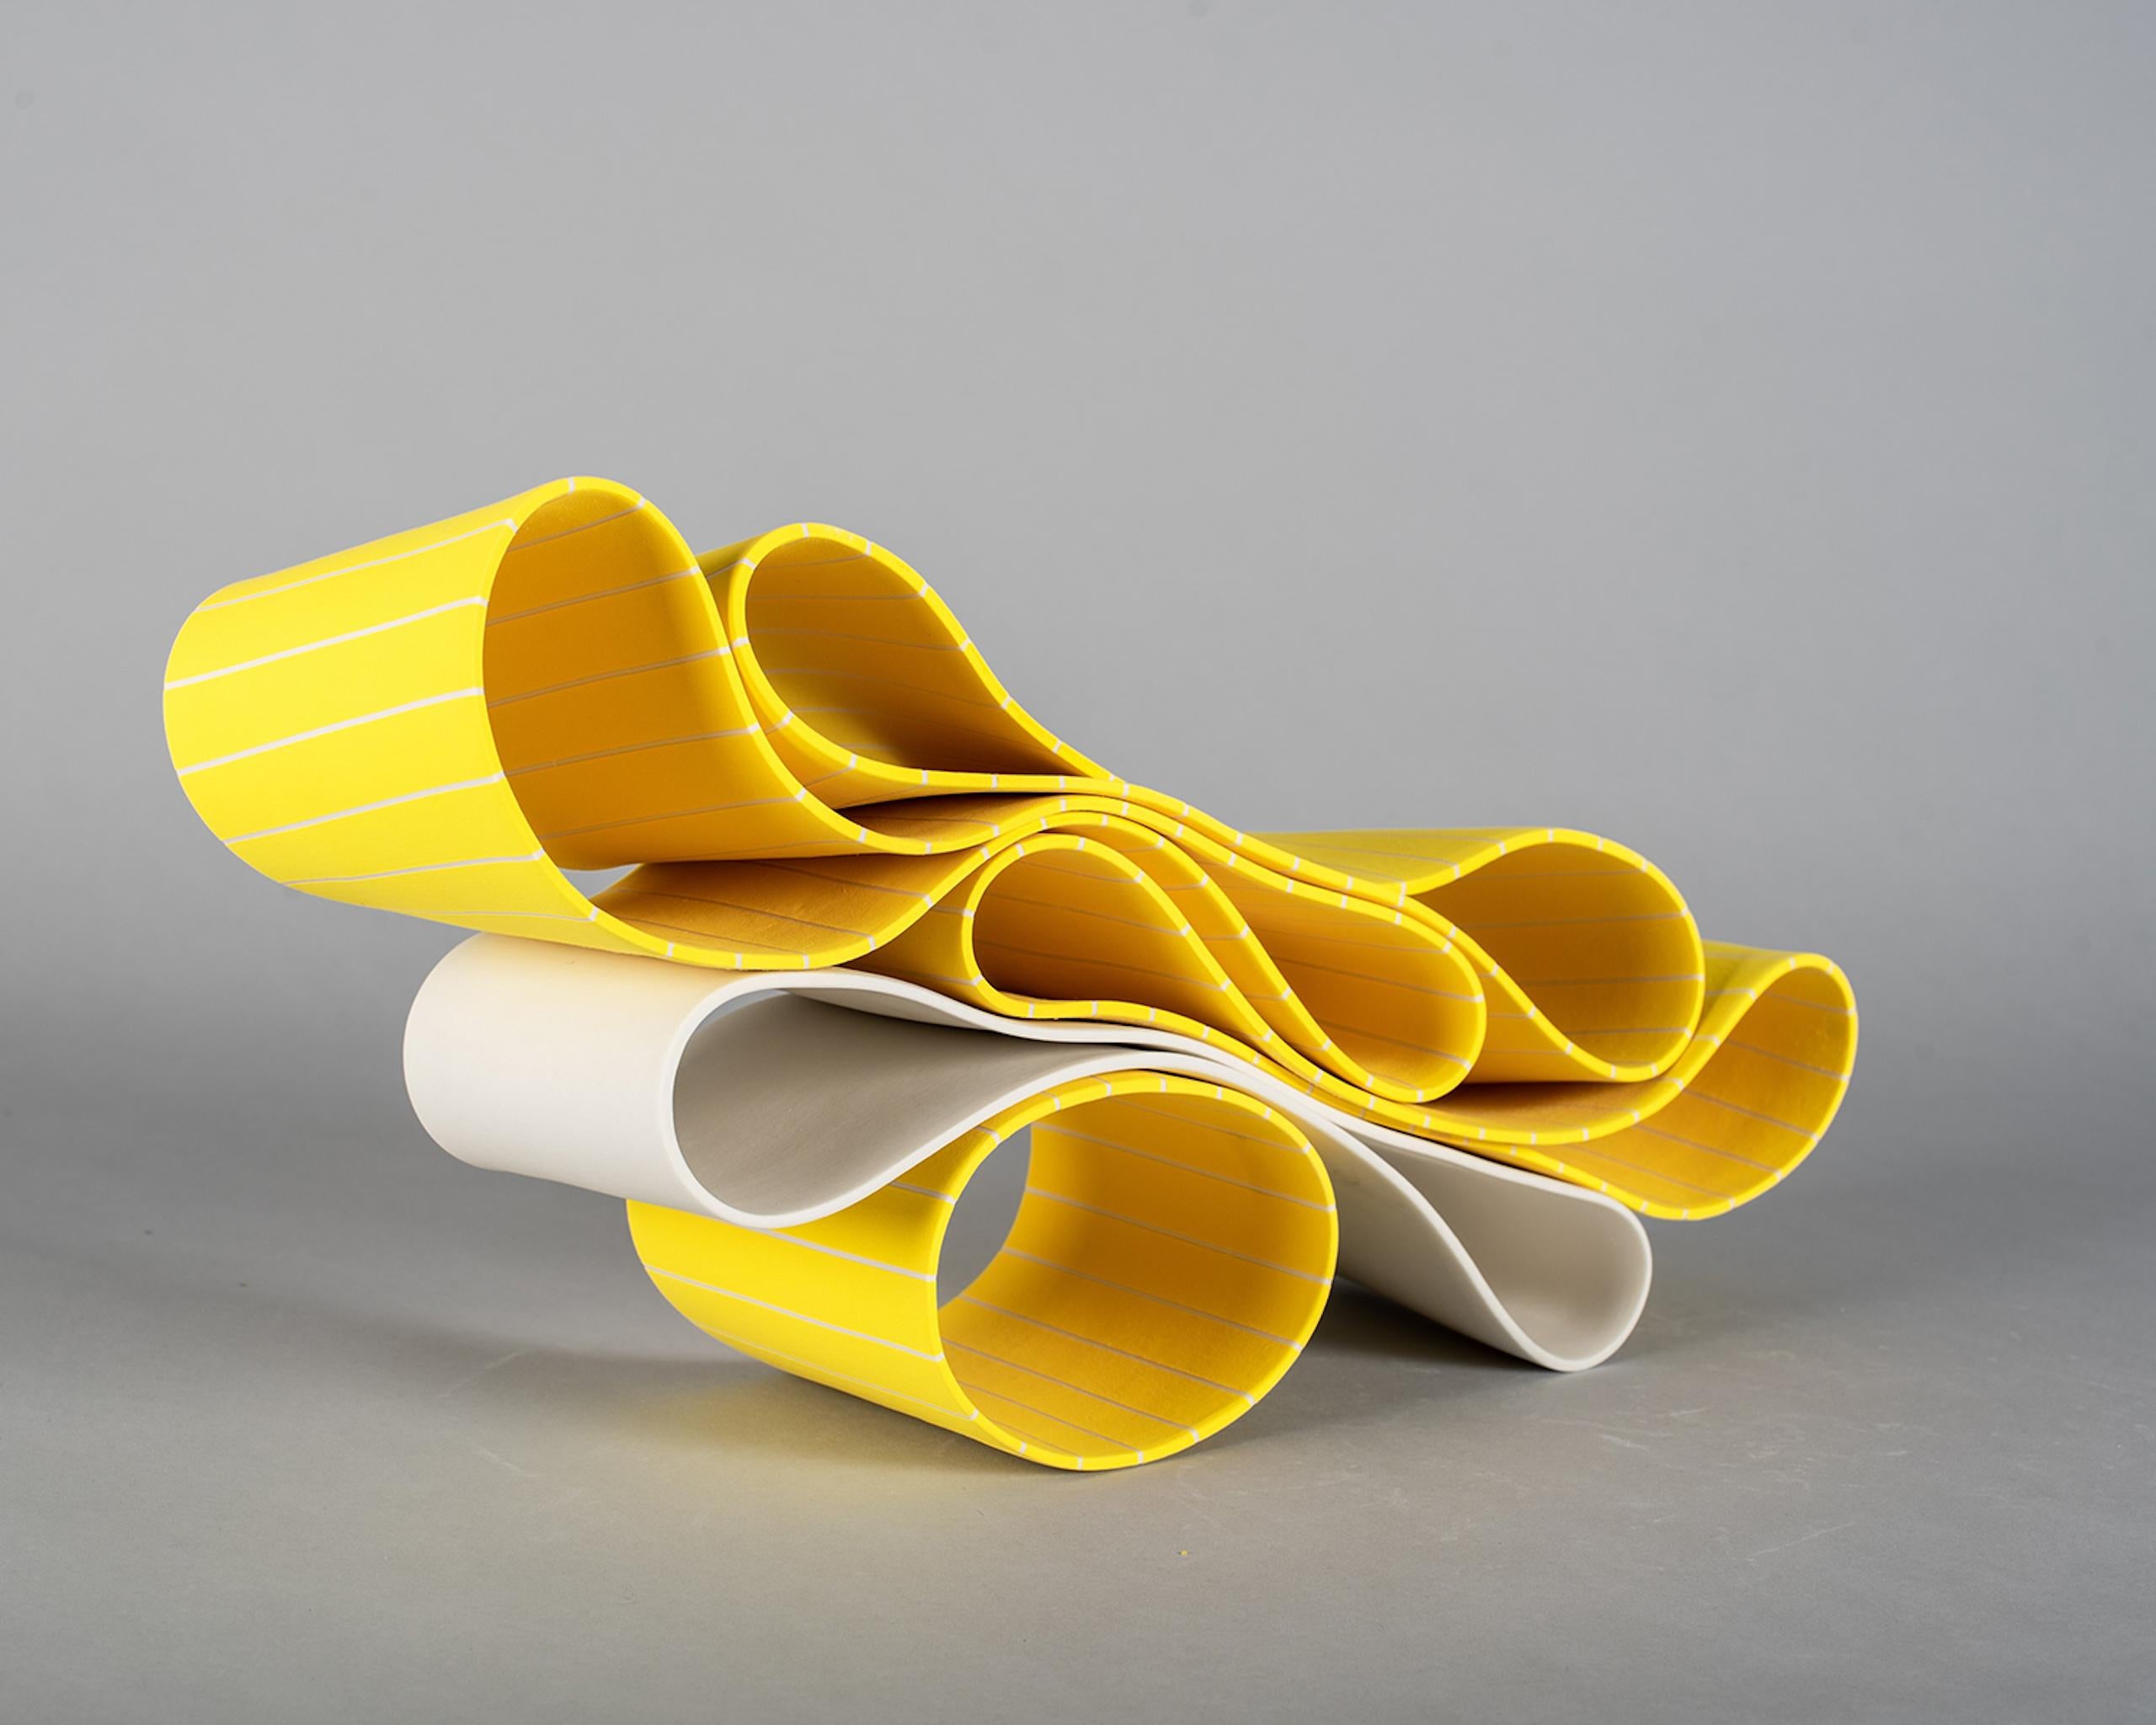 Folding in Motion 9 by Simcha Even-Chen - Porcelain sculpture, yellow lines For Sale 1